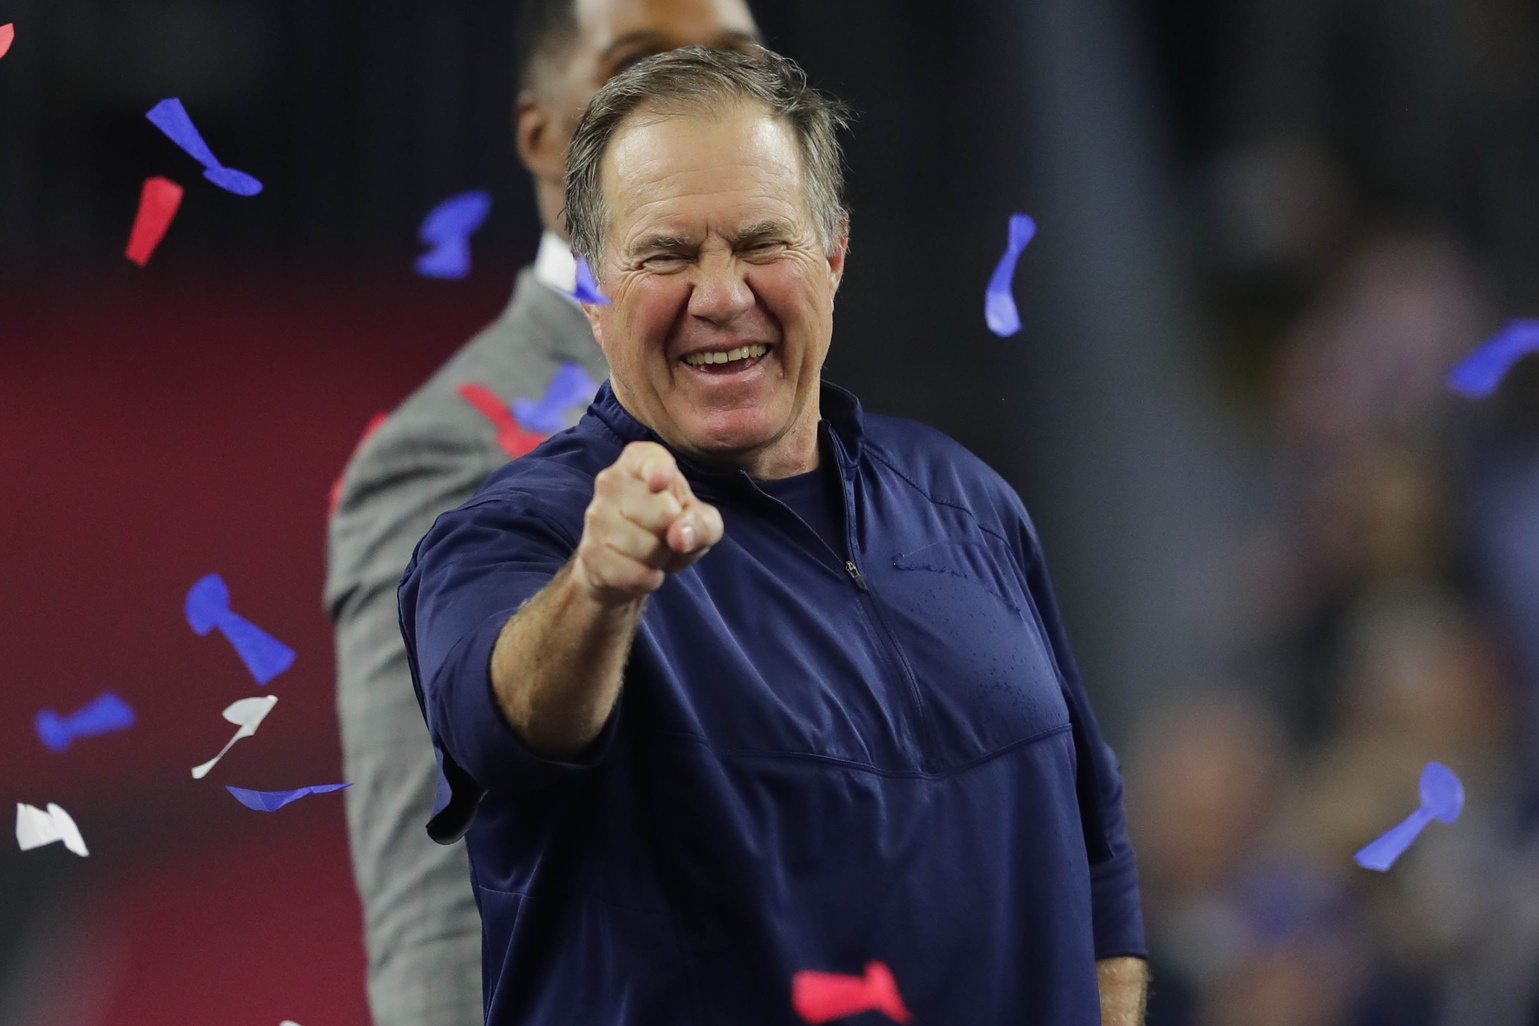 NFL free agency, Bill Belichick and the Patriots are in a prime position heading into free agency with Jimmy Garoppolo in their back pocket.